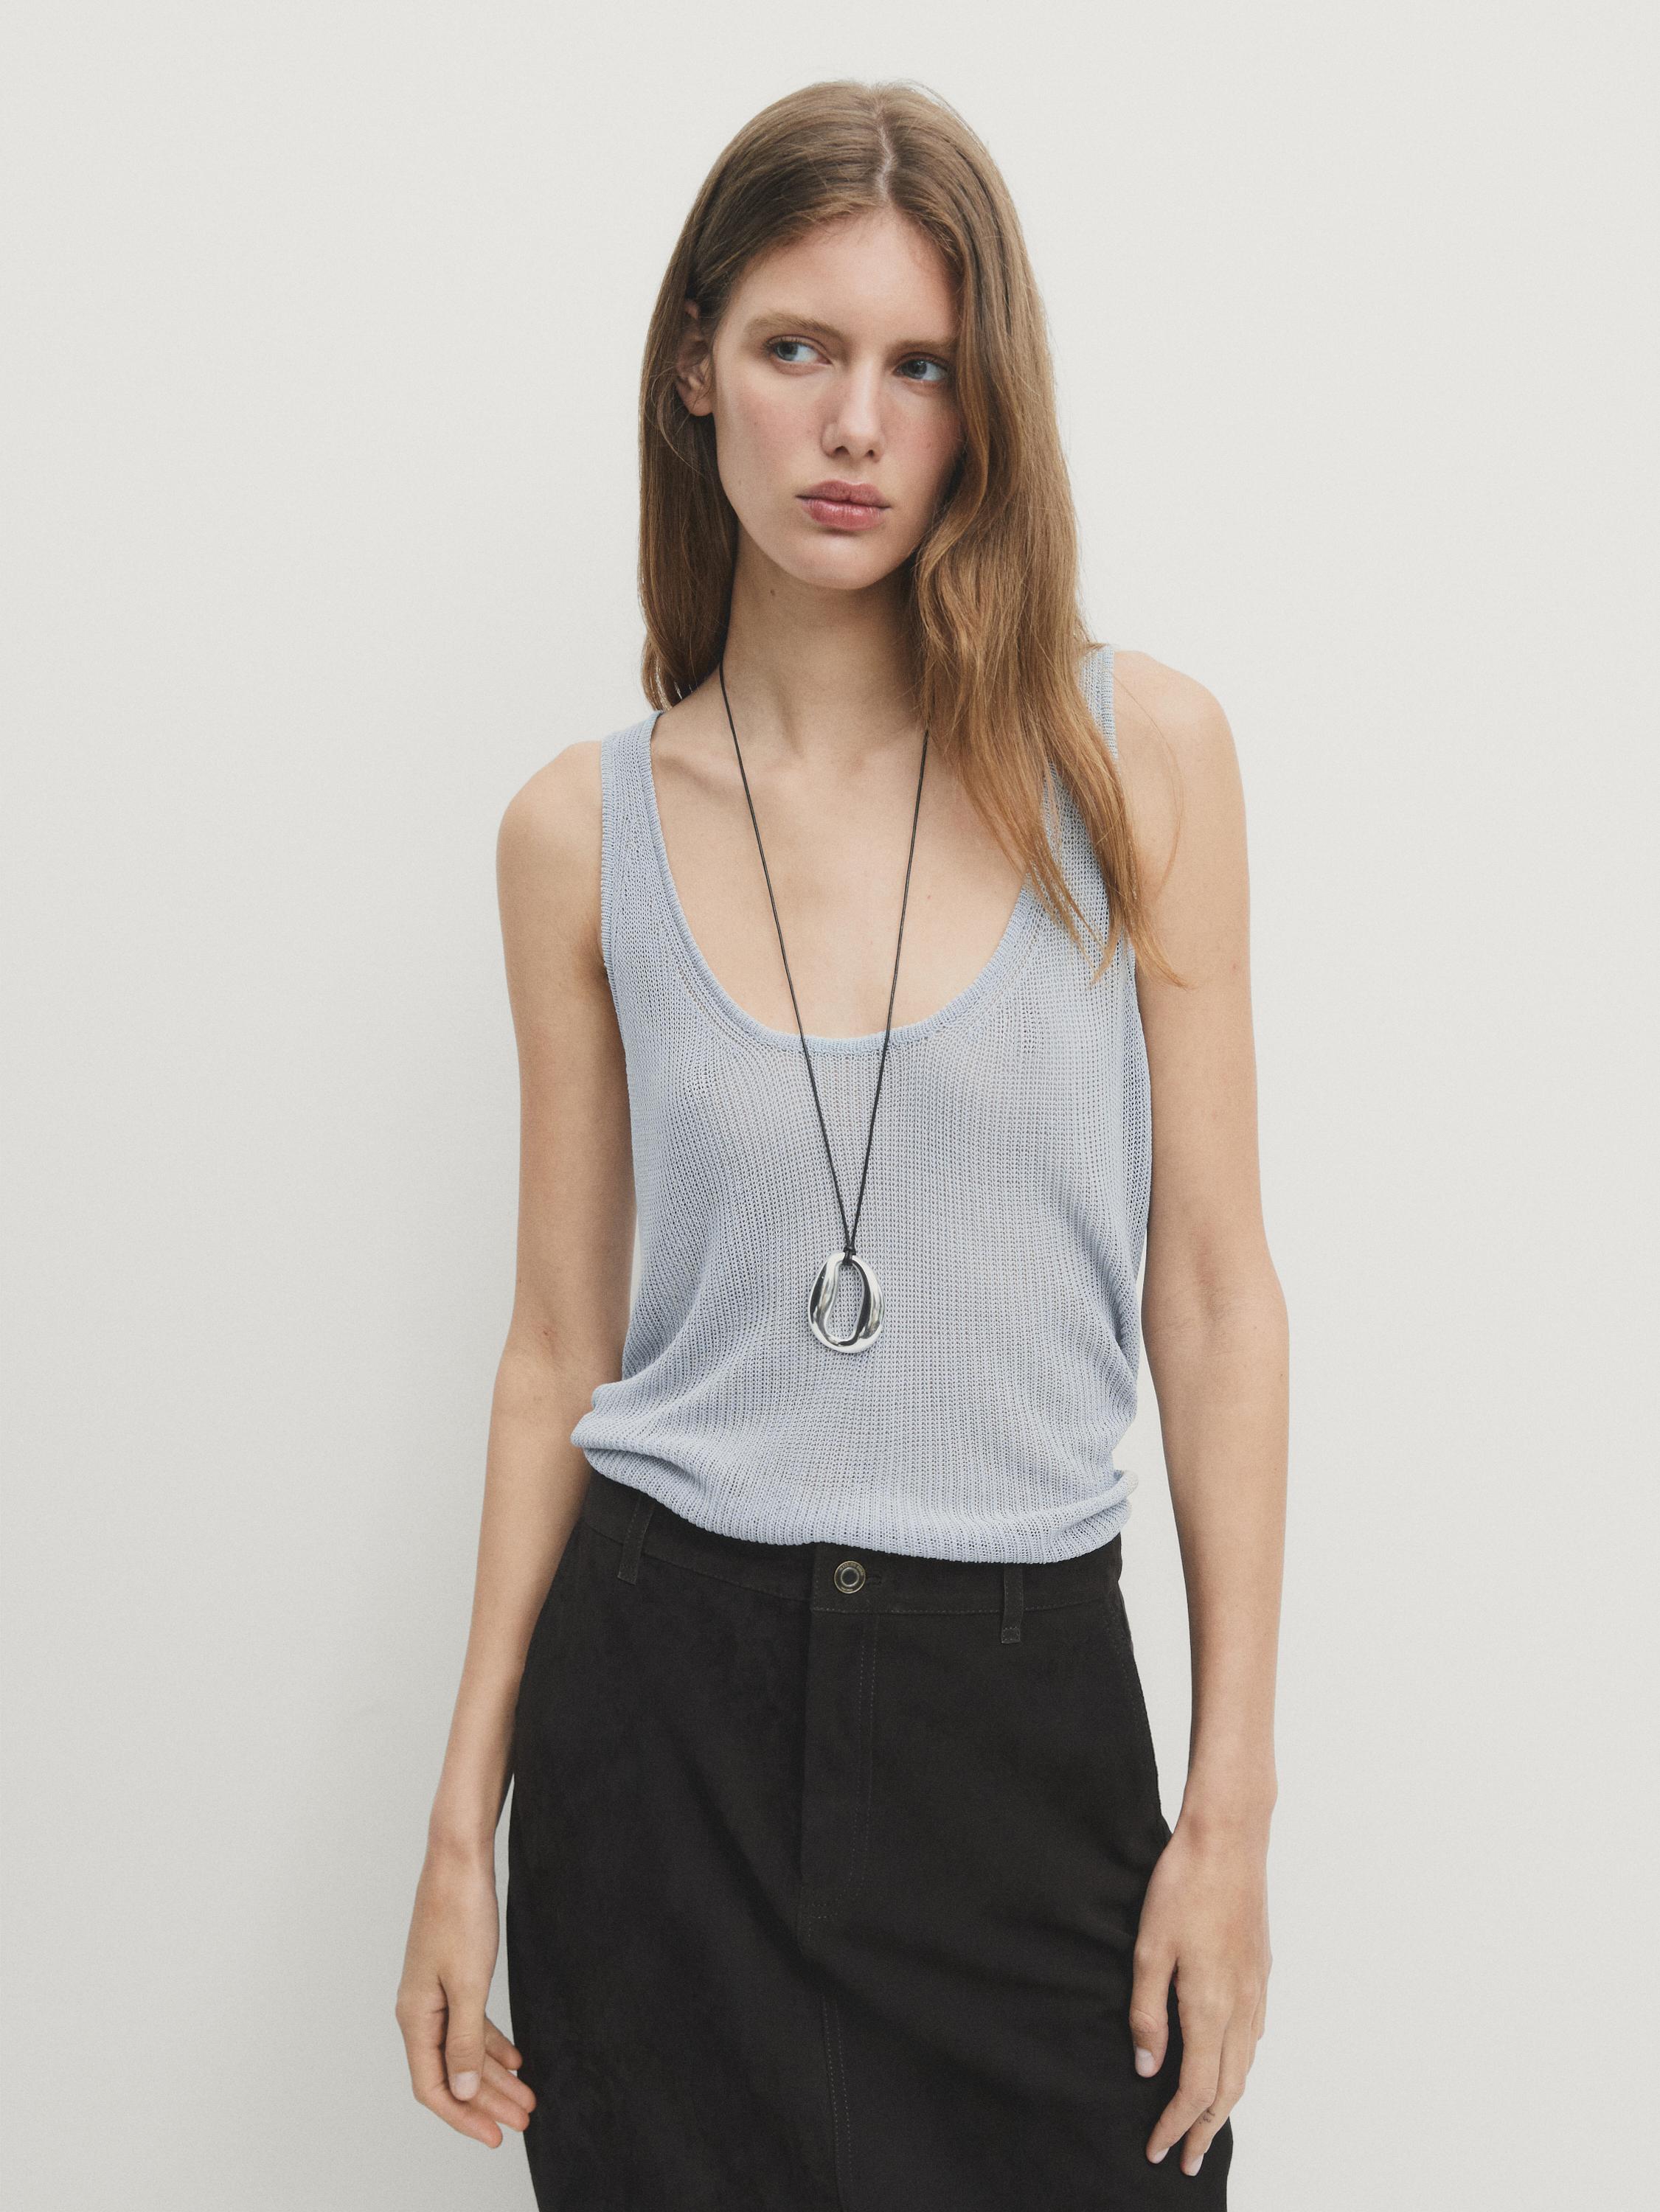 Strappy knit top with neckline detail